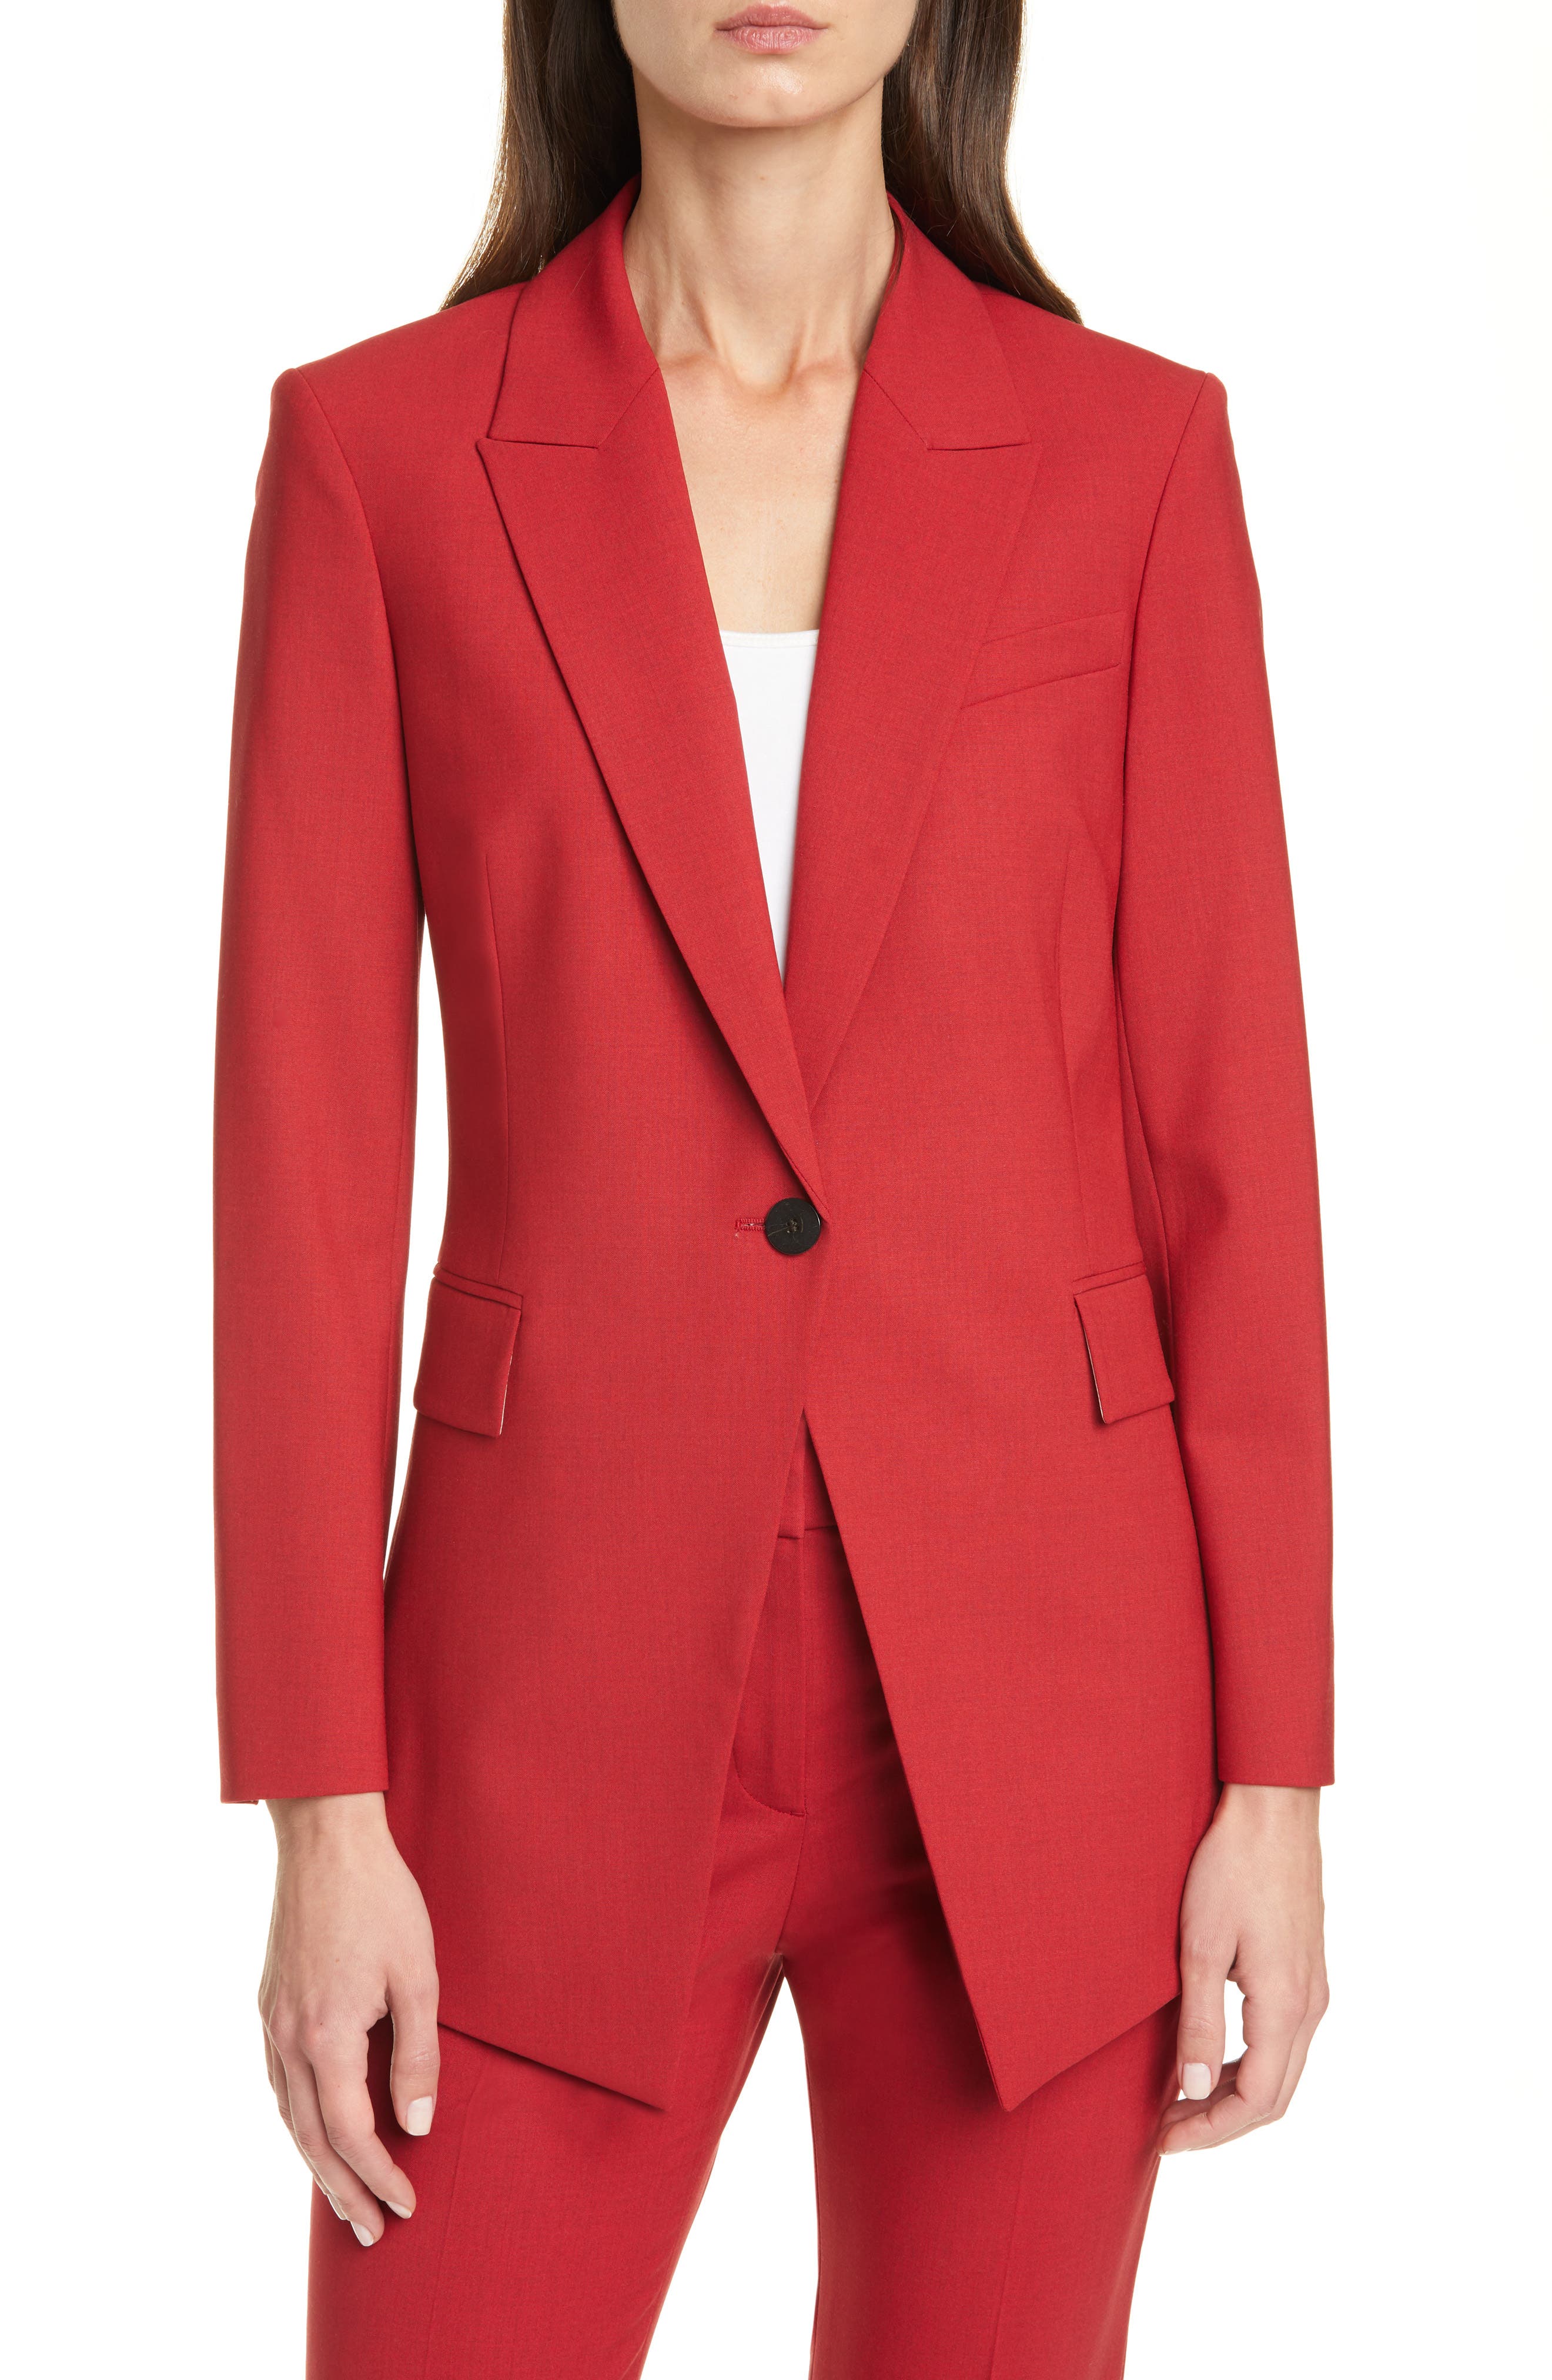 theory red suit